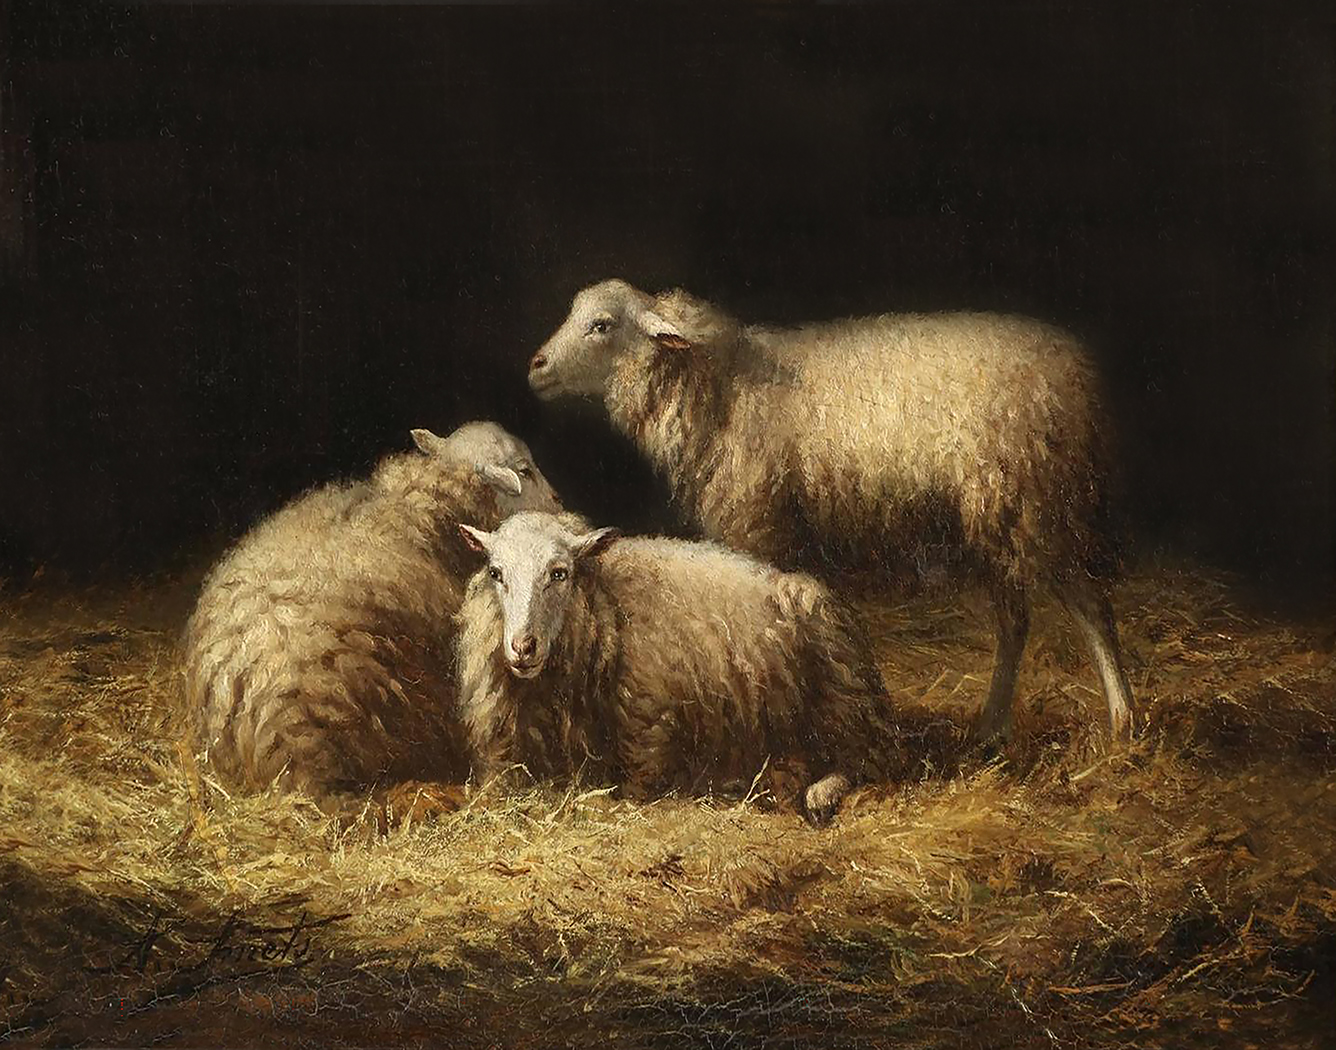 Farm/Pastoral Barnyard Sheep in the Hay Framed Oil Painting P ...